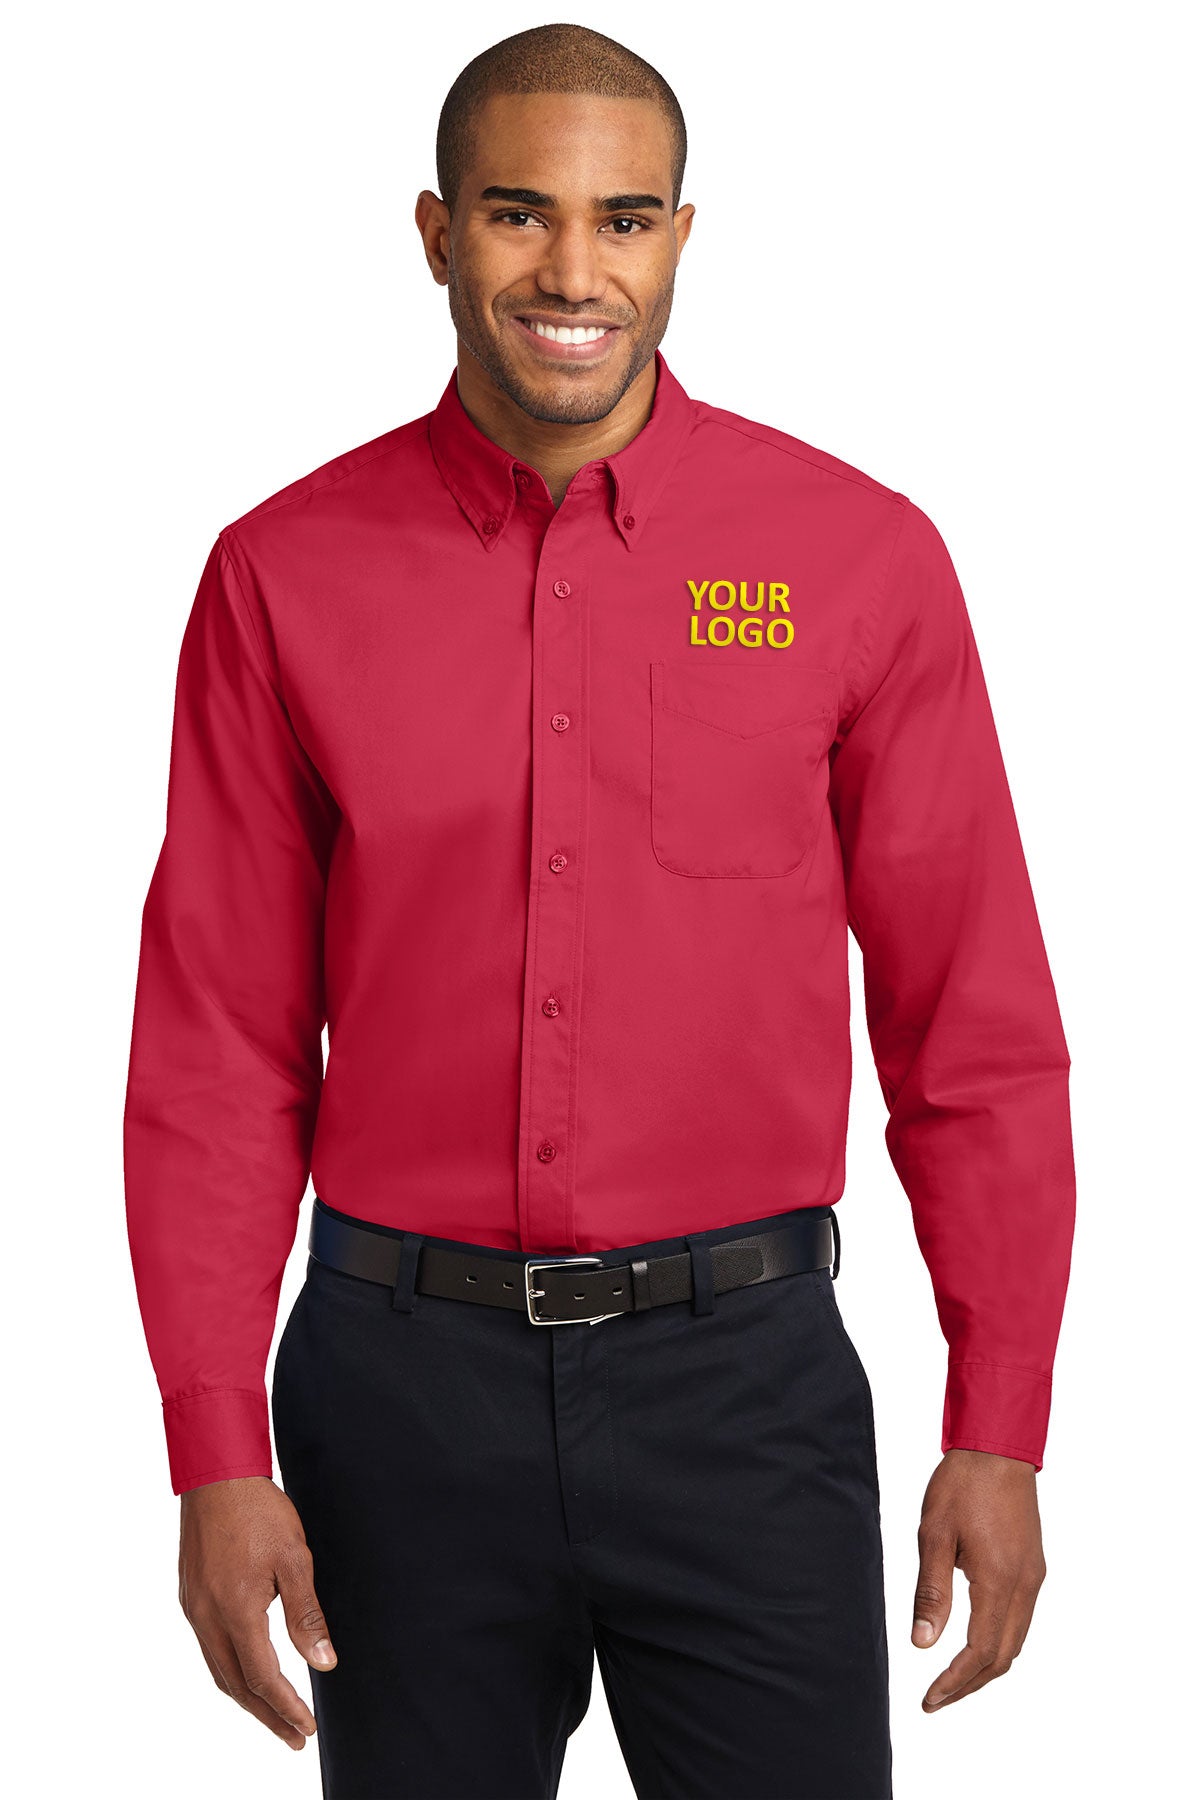 Port Authority Red/ Light Stone TLS608 embroidered work shirts